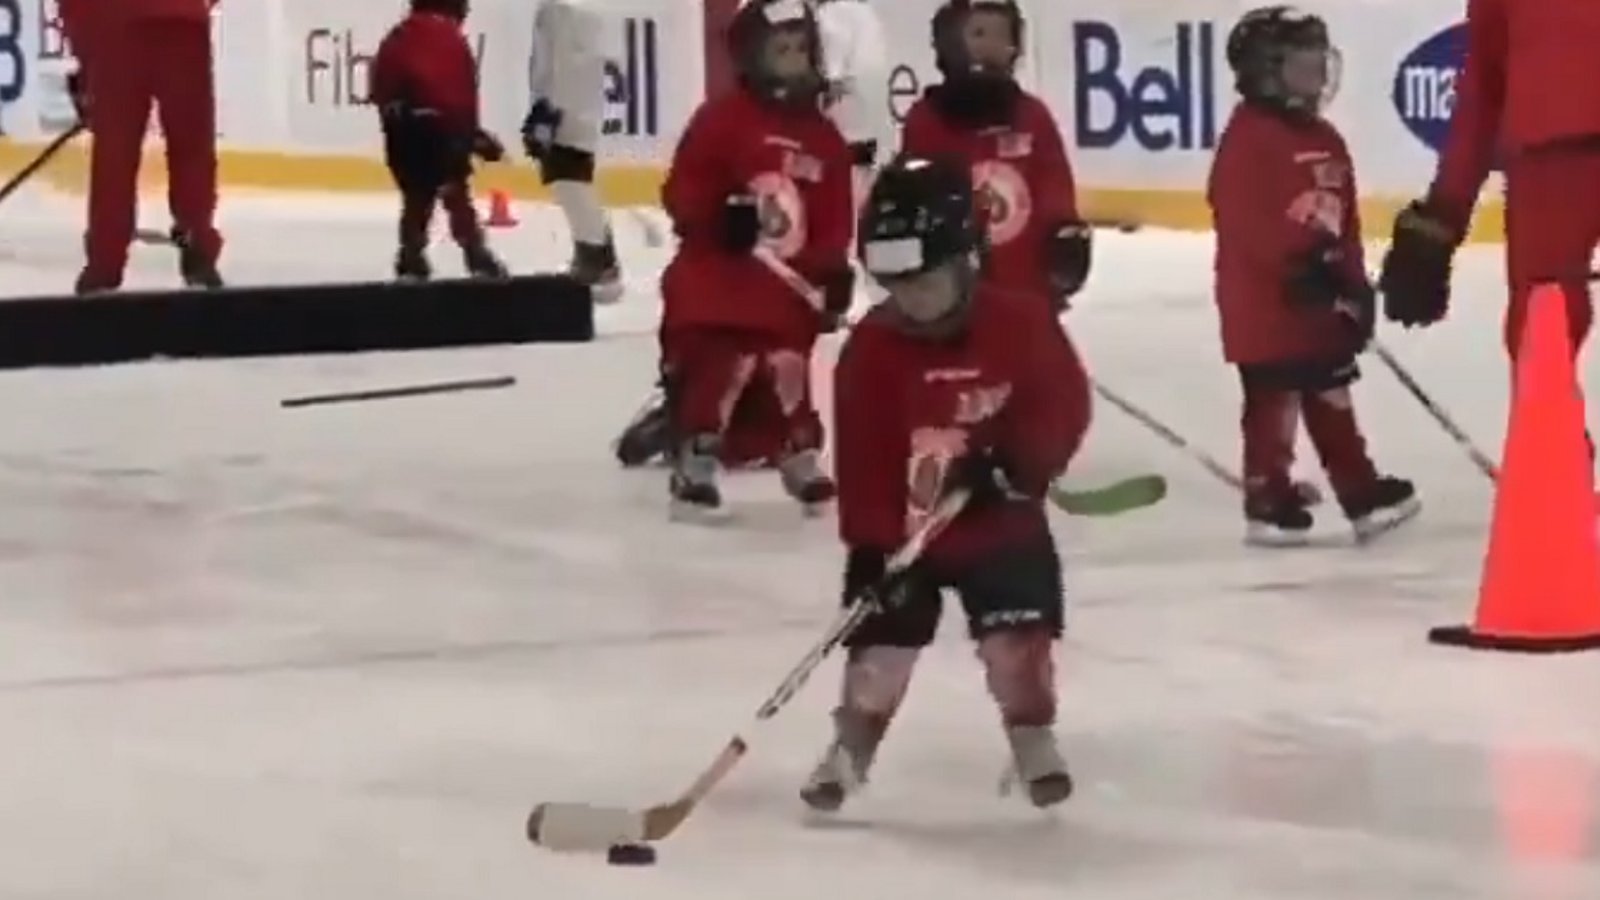 Little hockey player's goal celebration might be the cutest moment of the year.